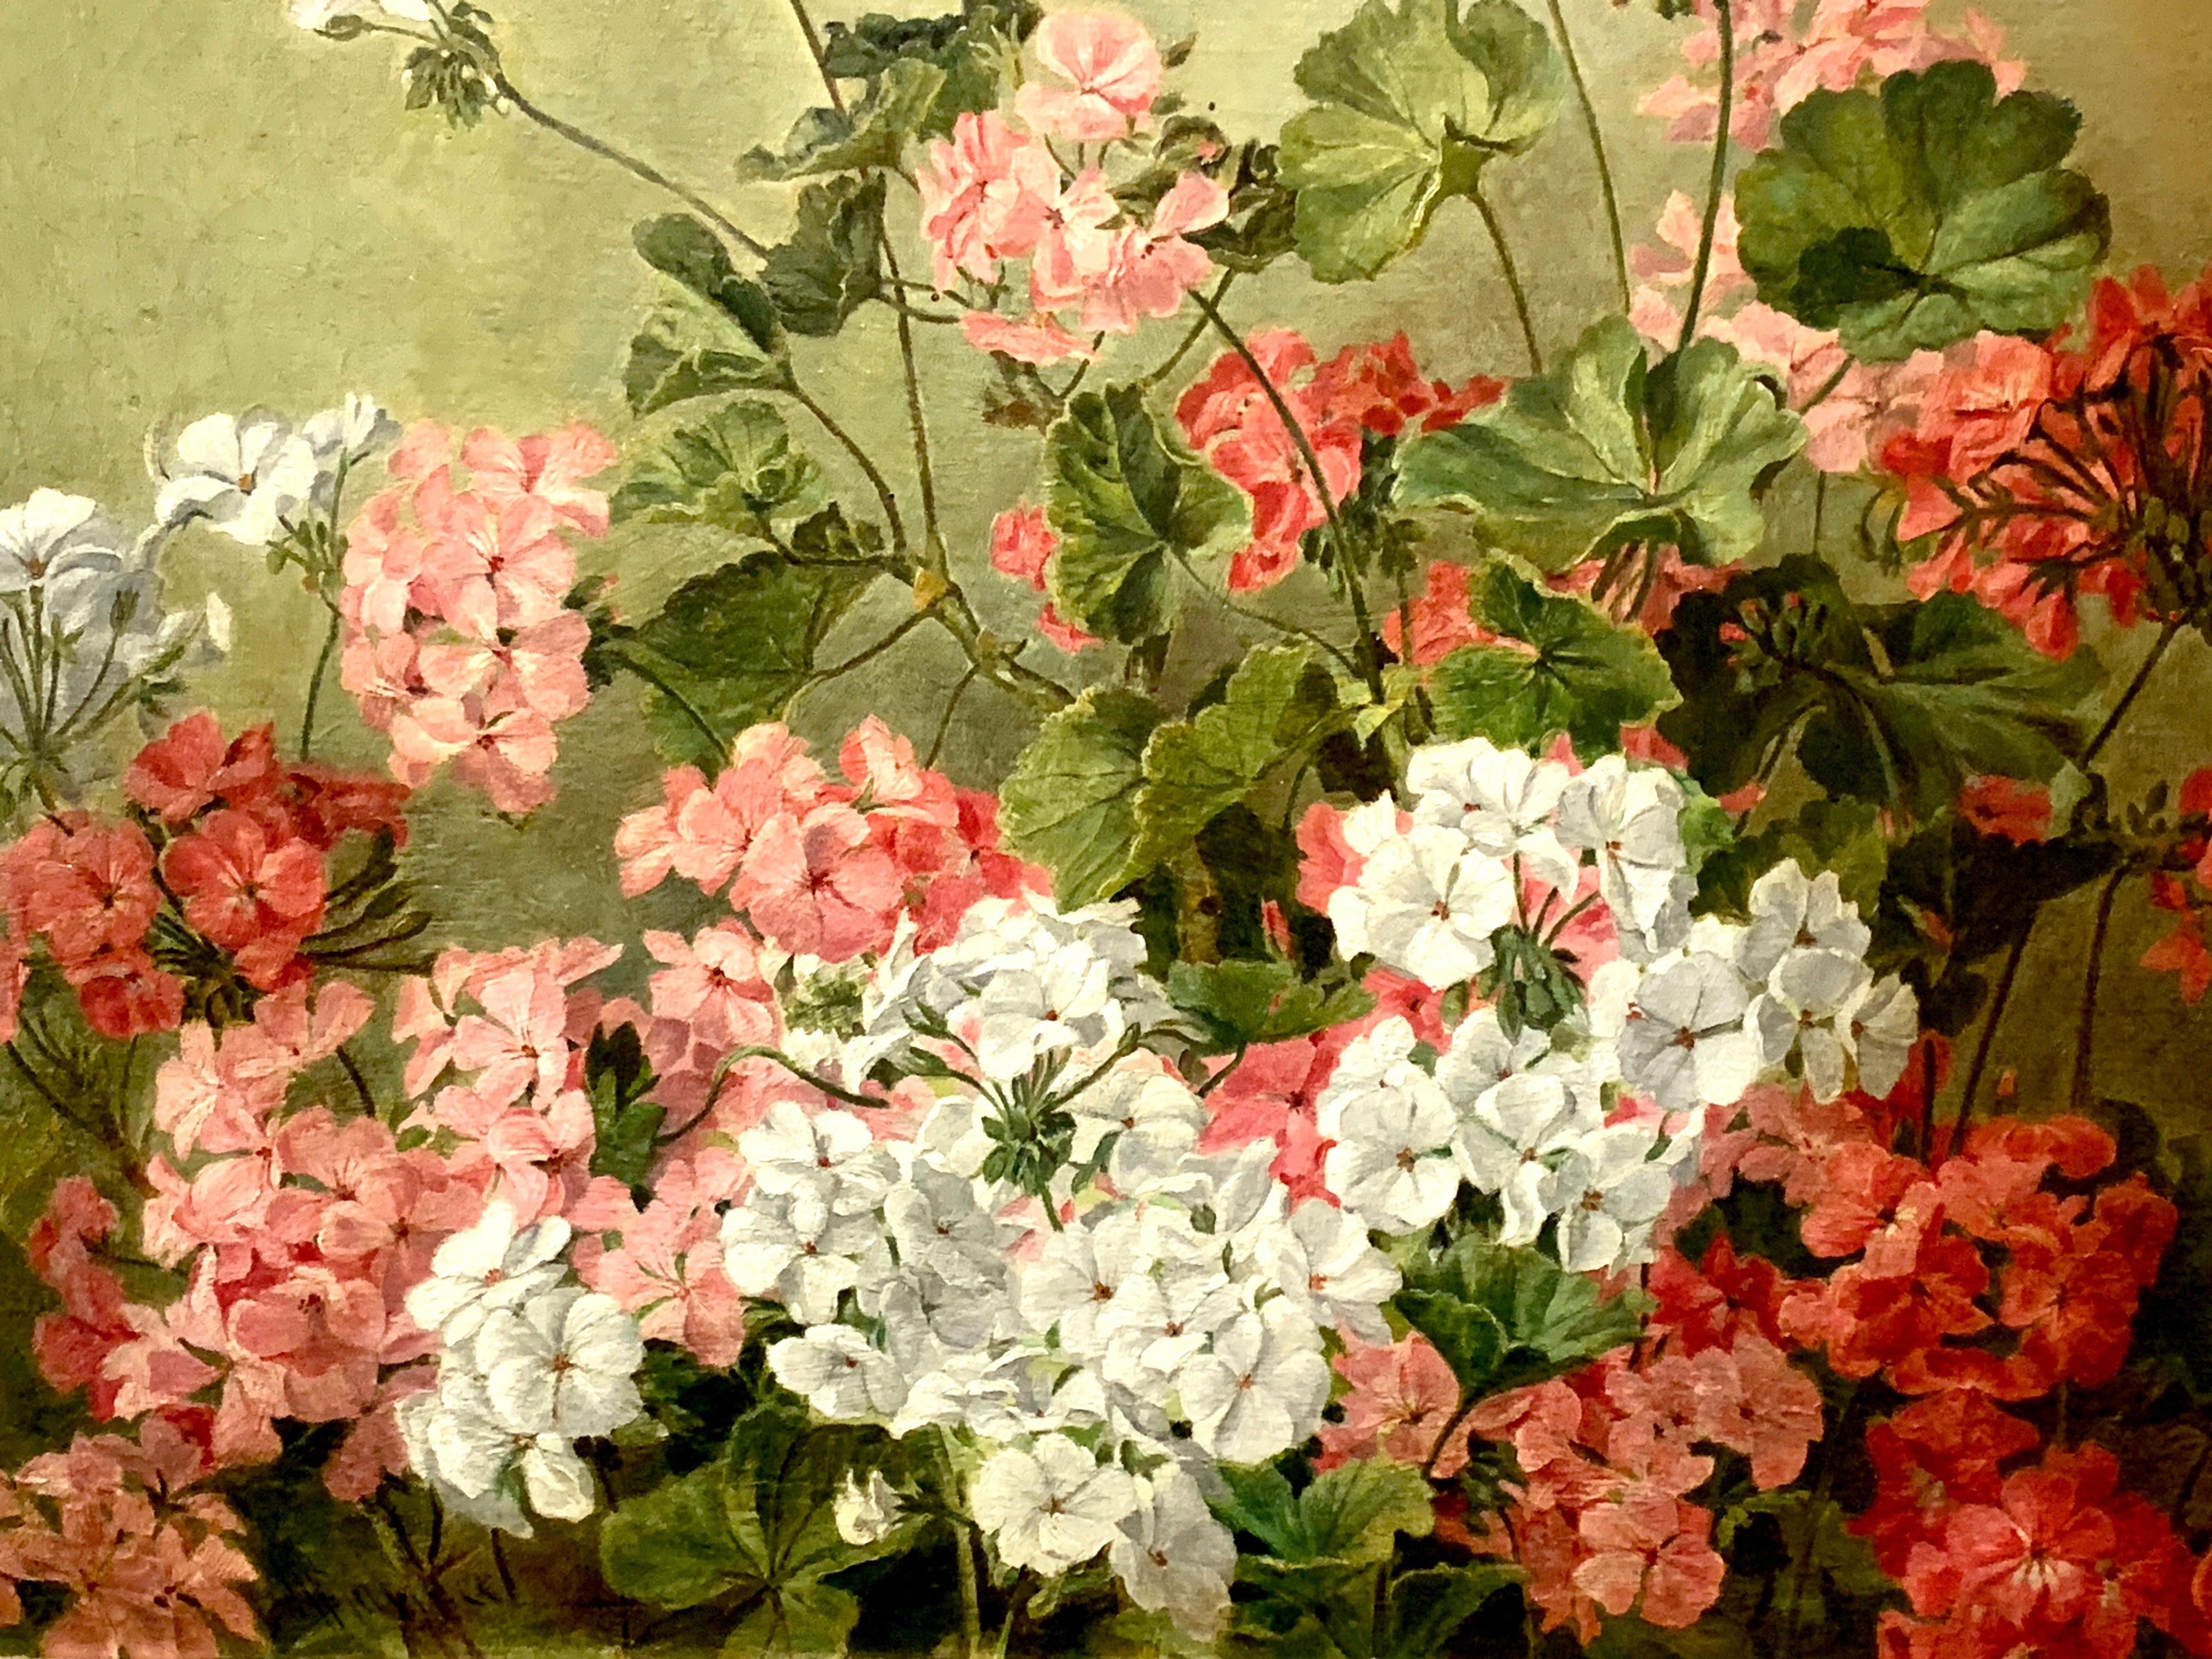 Wonderful English Antique oil on canvas Pink and White Geranium flowers.

Wallace was a painter during the latter part of the 19th century. He painted various subjects, but this is by far the finest still life of flowers I've ever seen him paint.